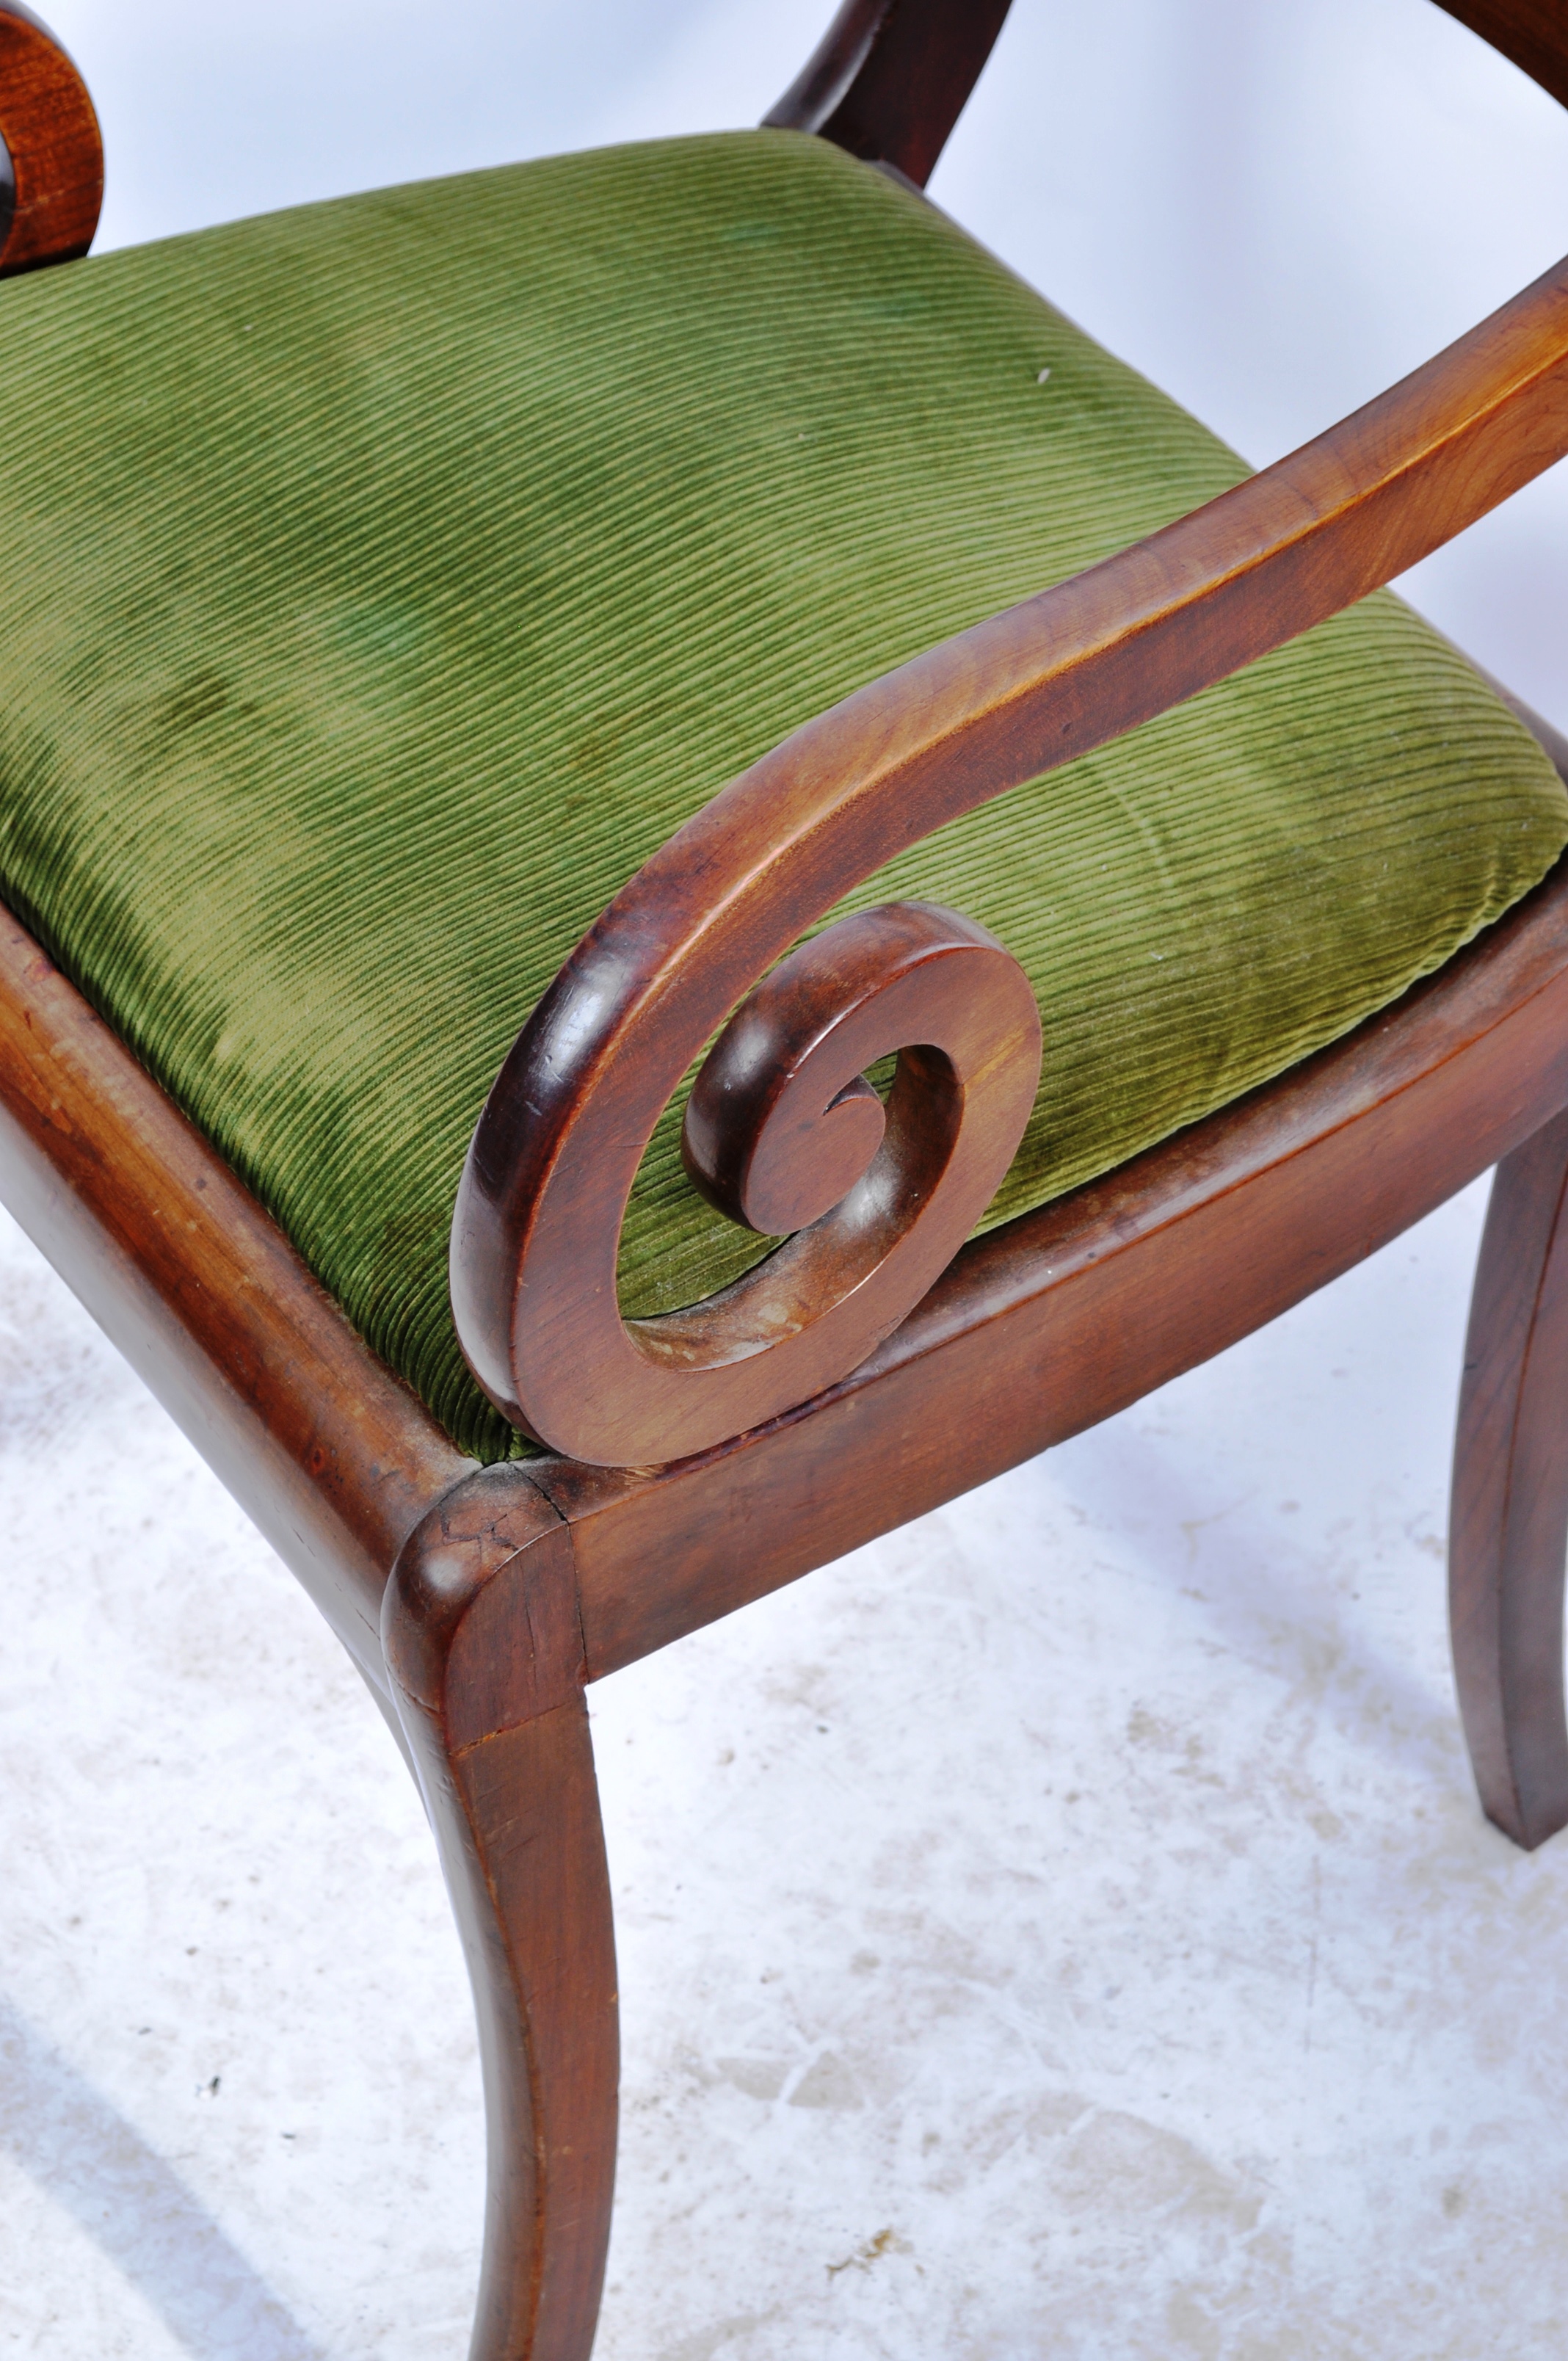 EARLY 19TH CENTURY REGENCY MAHOGANY SCROLLED ARM CHAIR - Image 6 of 8